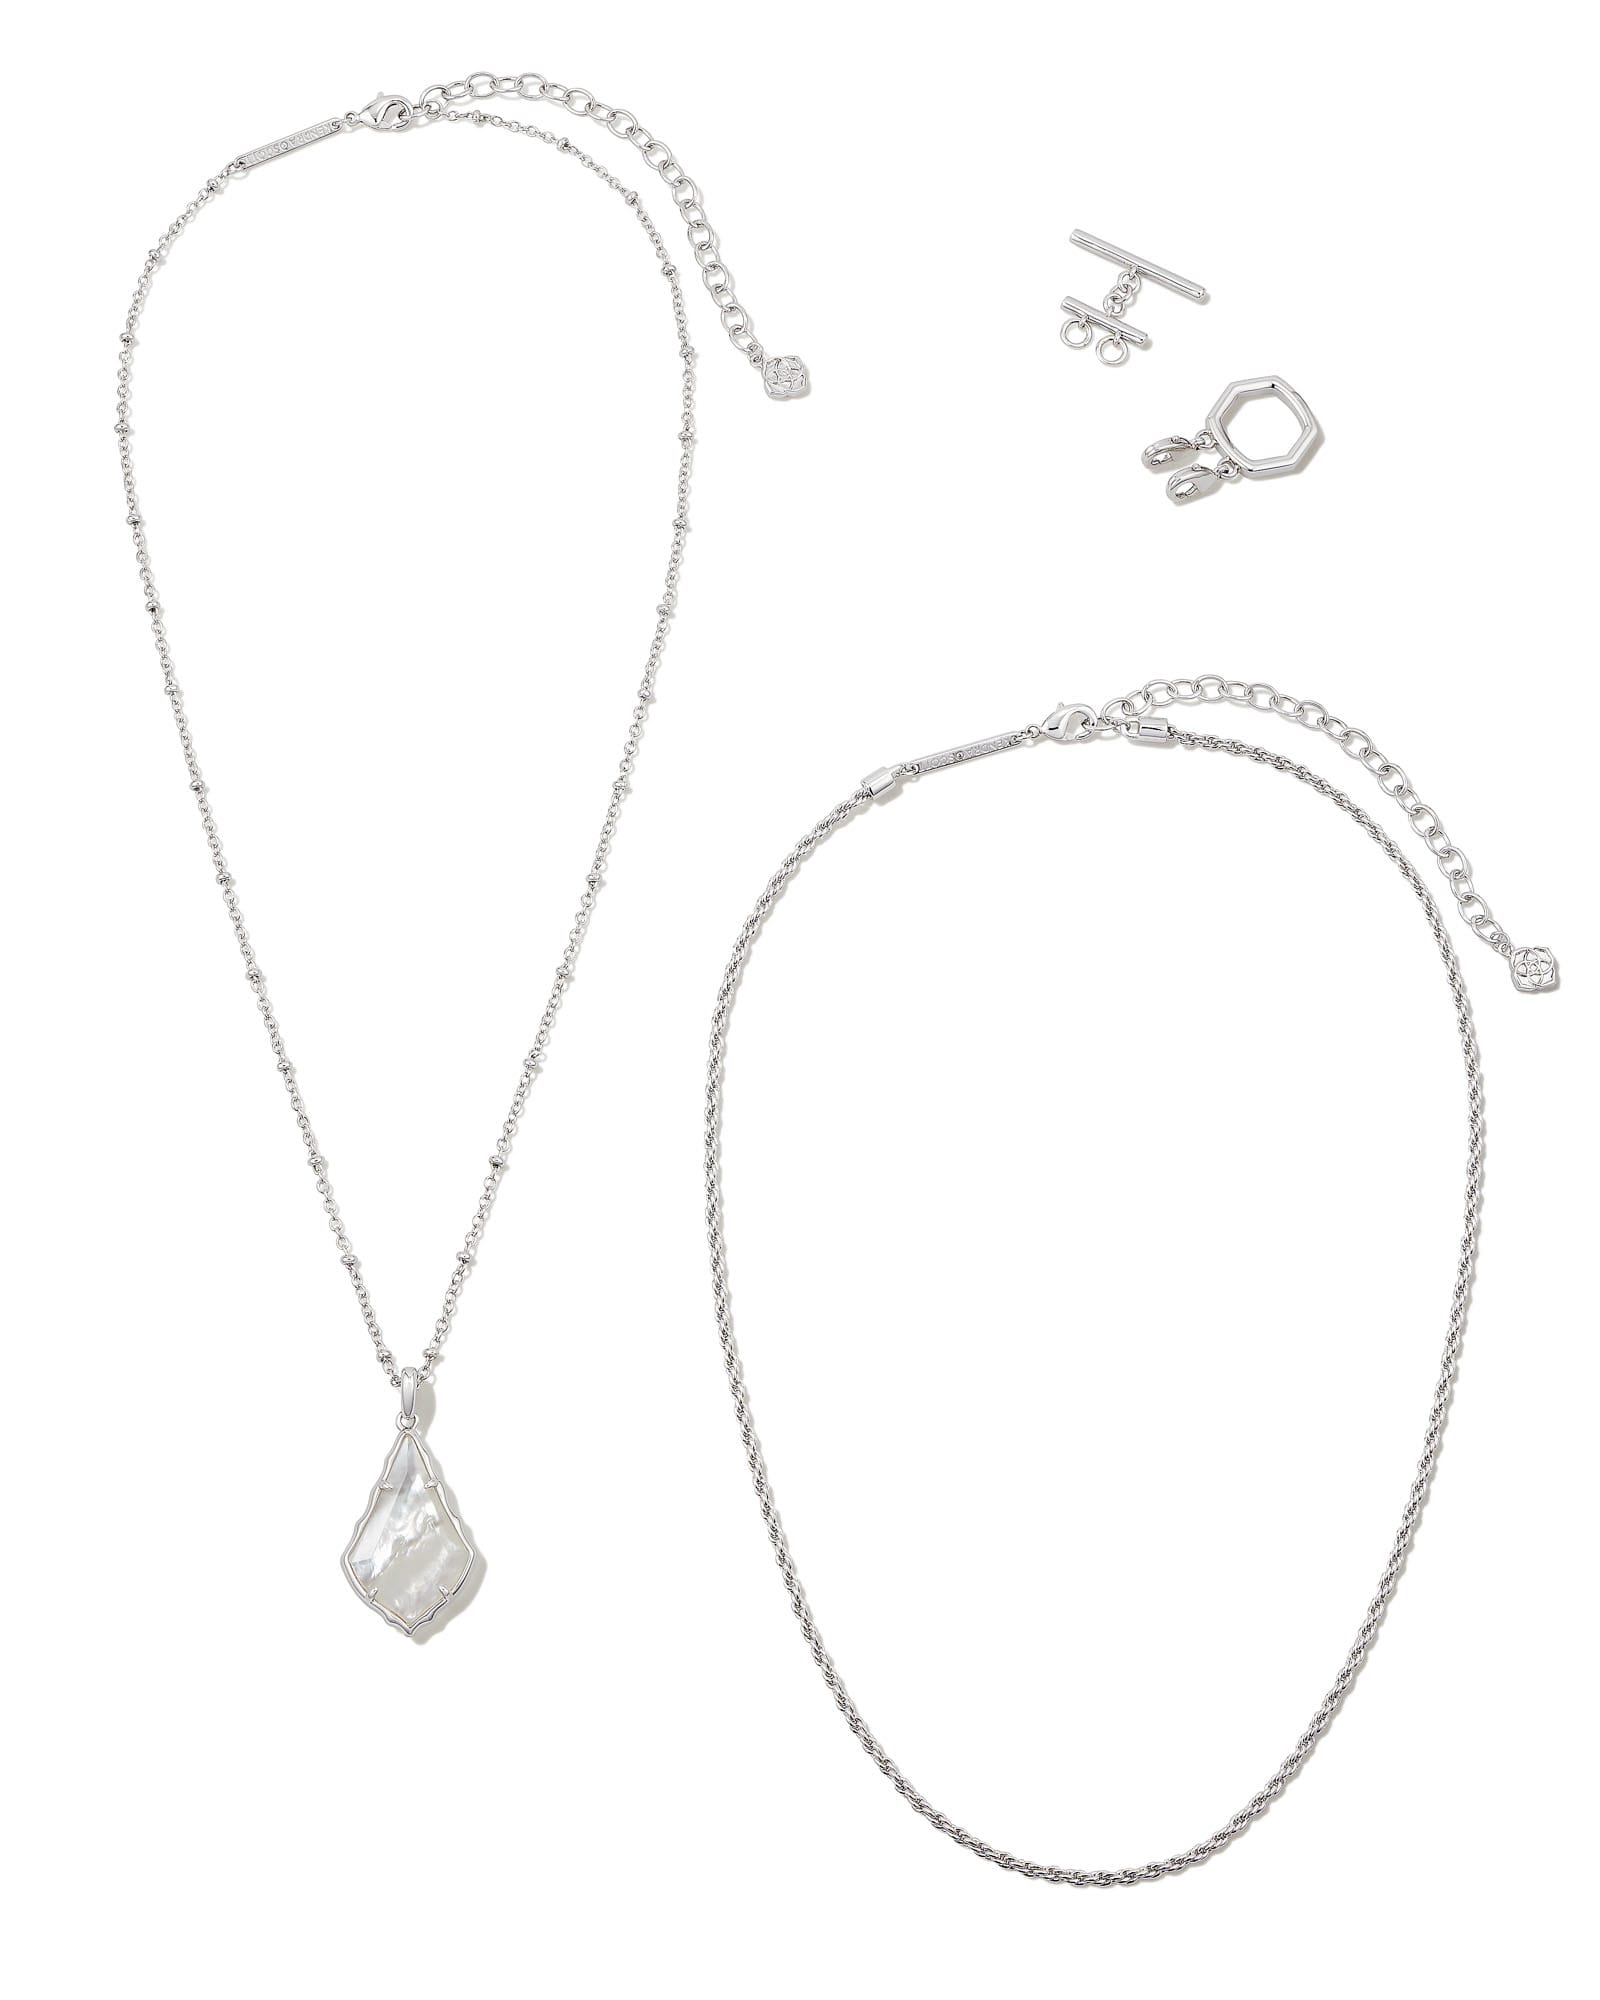 Faceted Alex Silver Convertible Necklace in Ivory Illusion